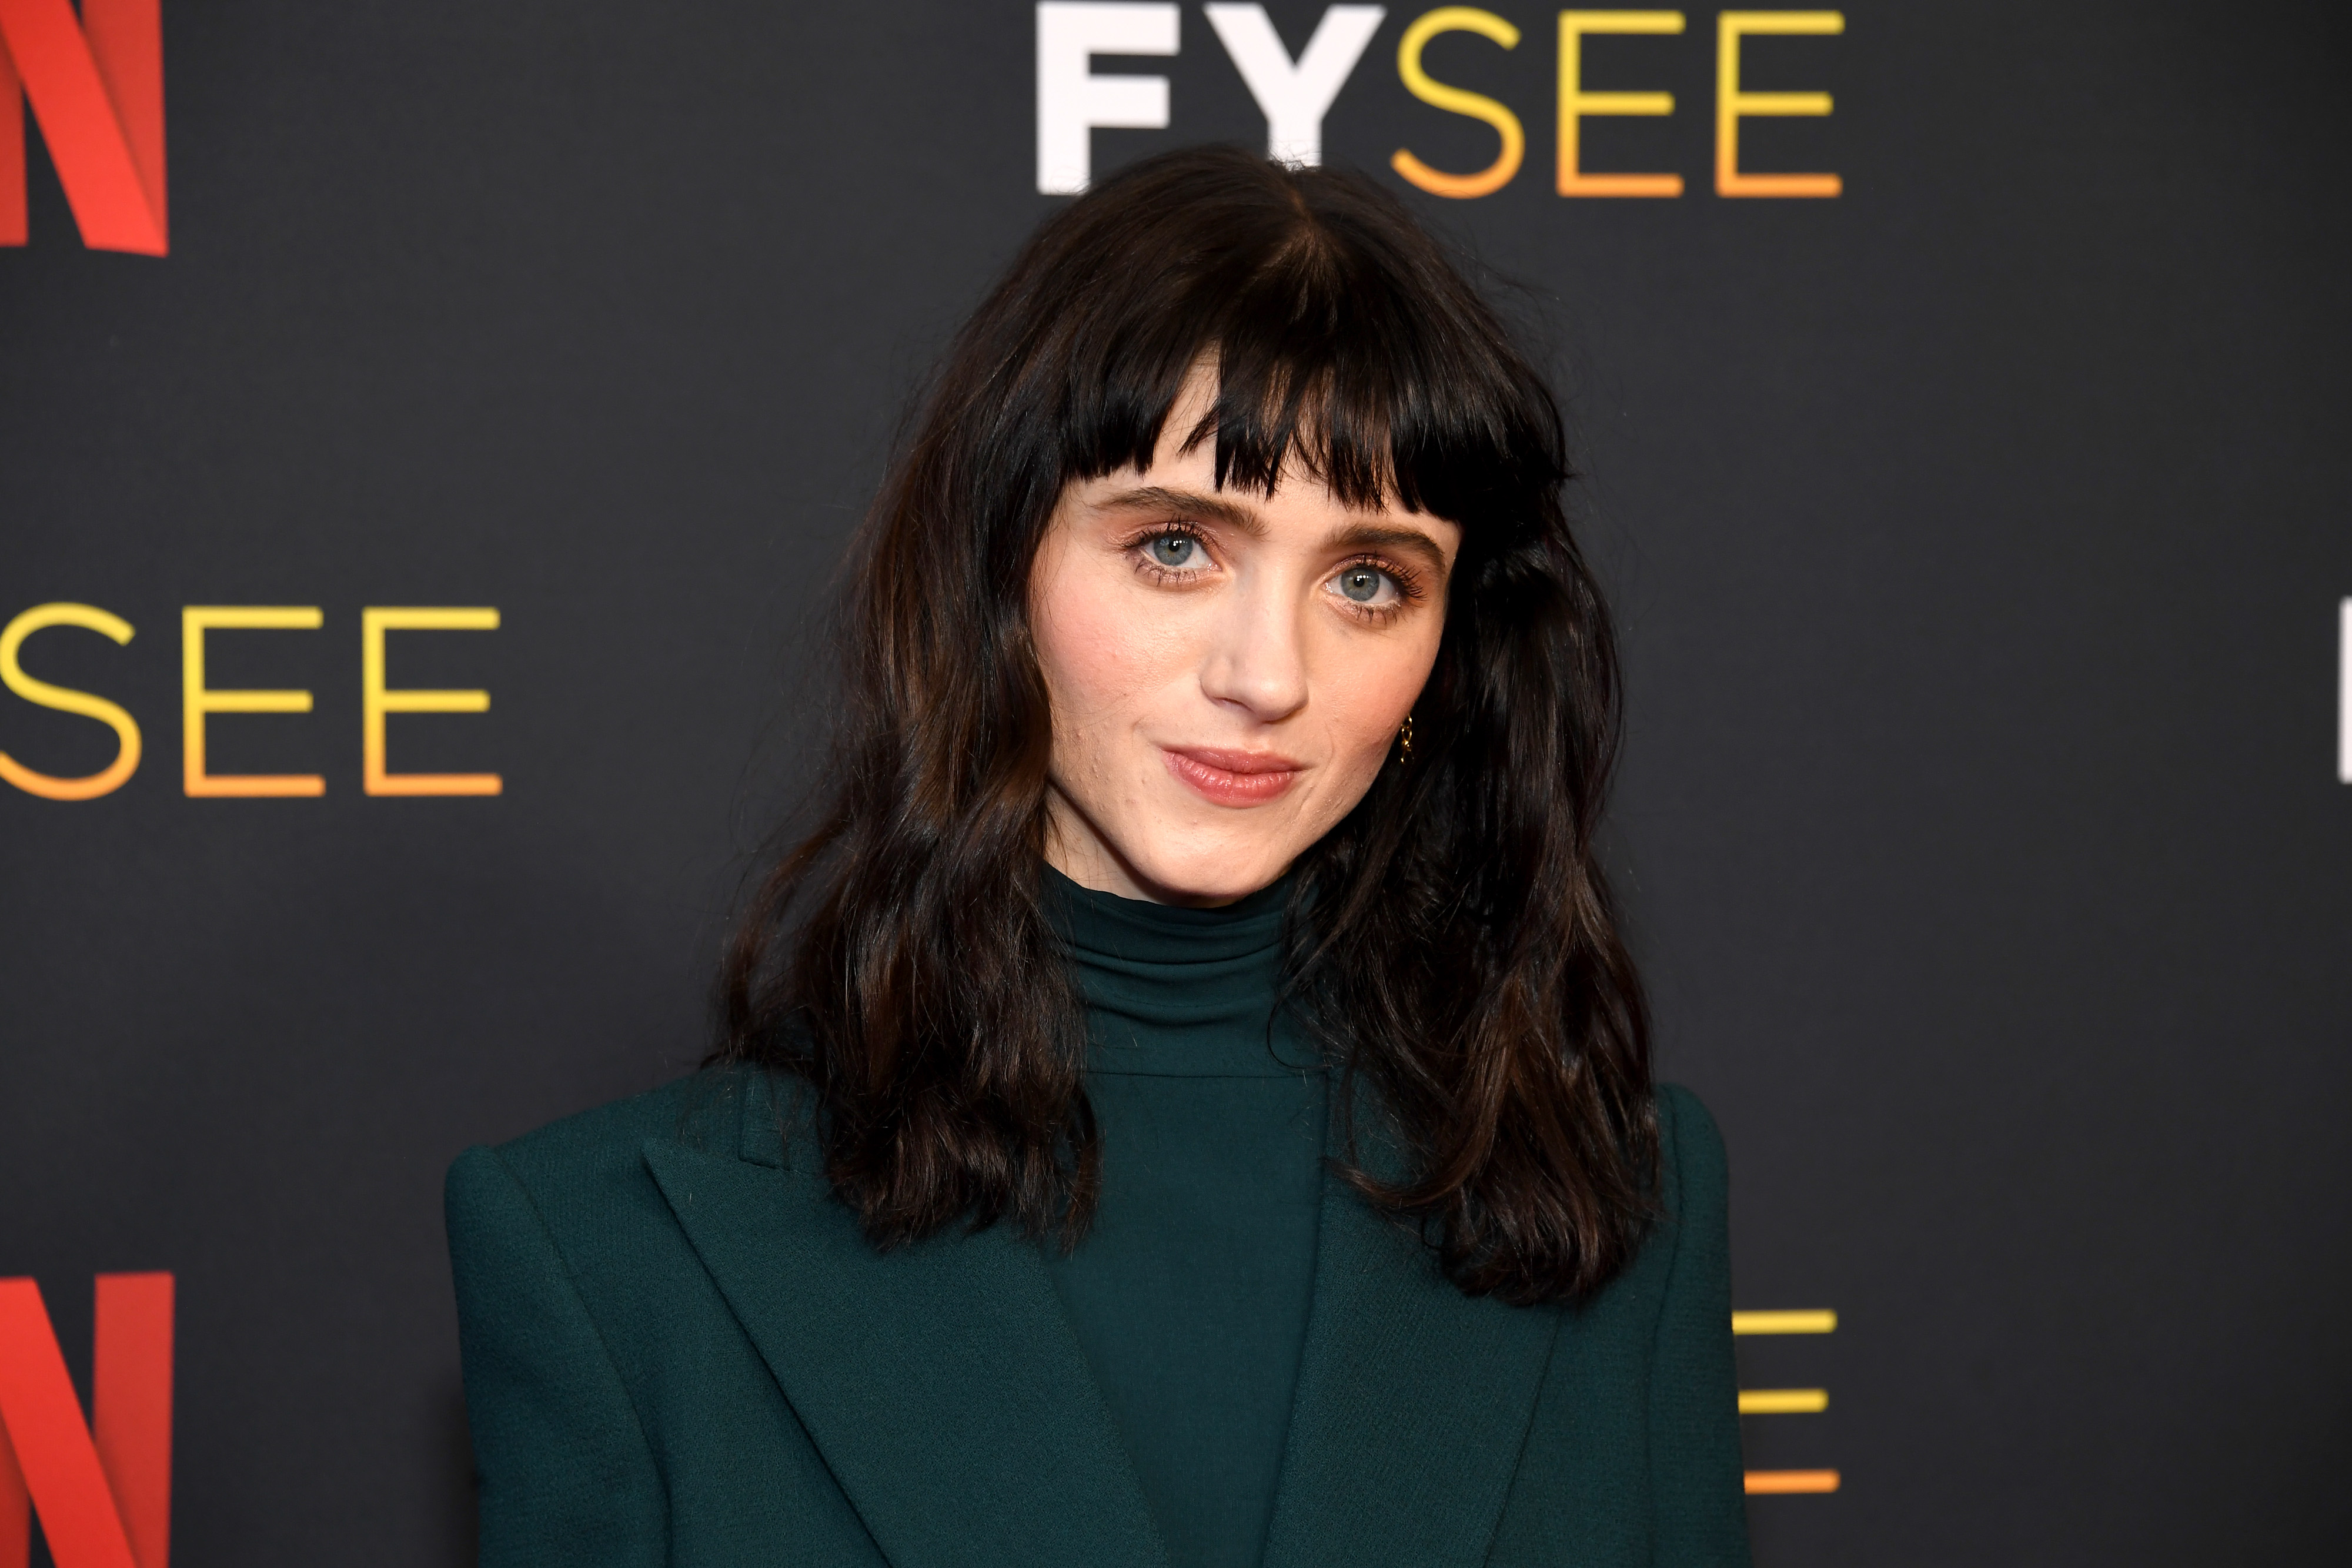 Natalia Dyer, who had a small role in Hannah Montana, attends the Netflix FYSEE event for Stranger Things